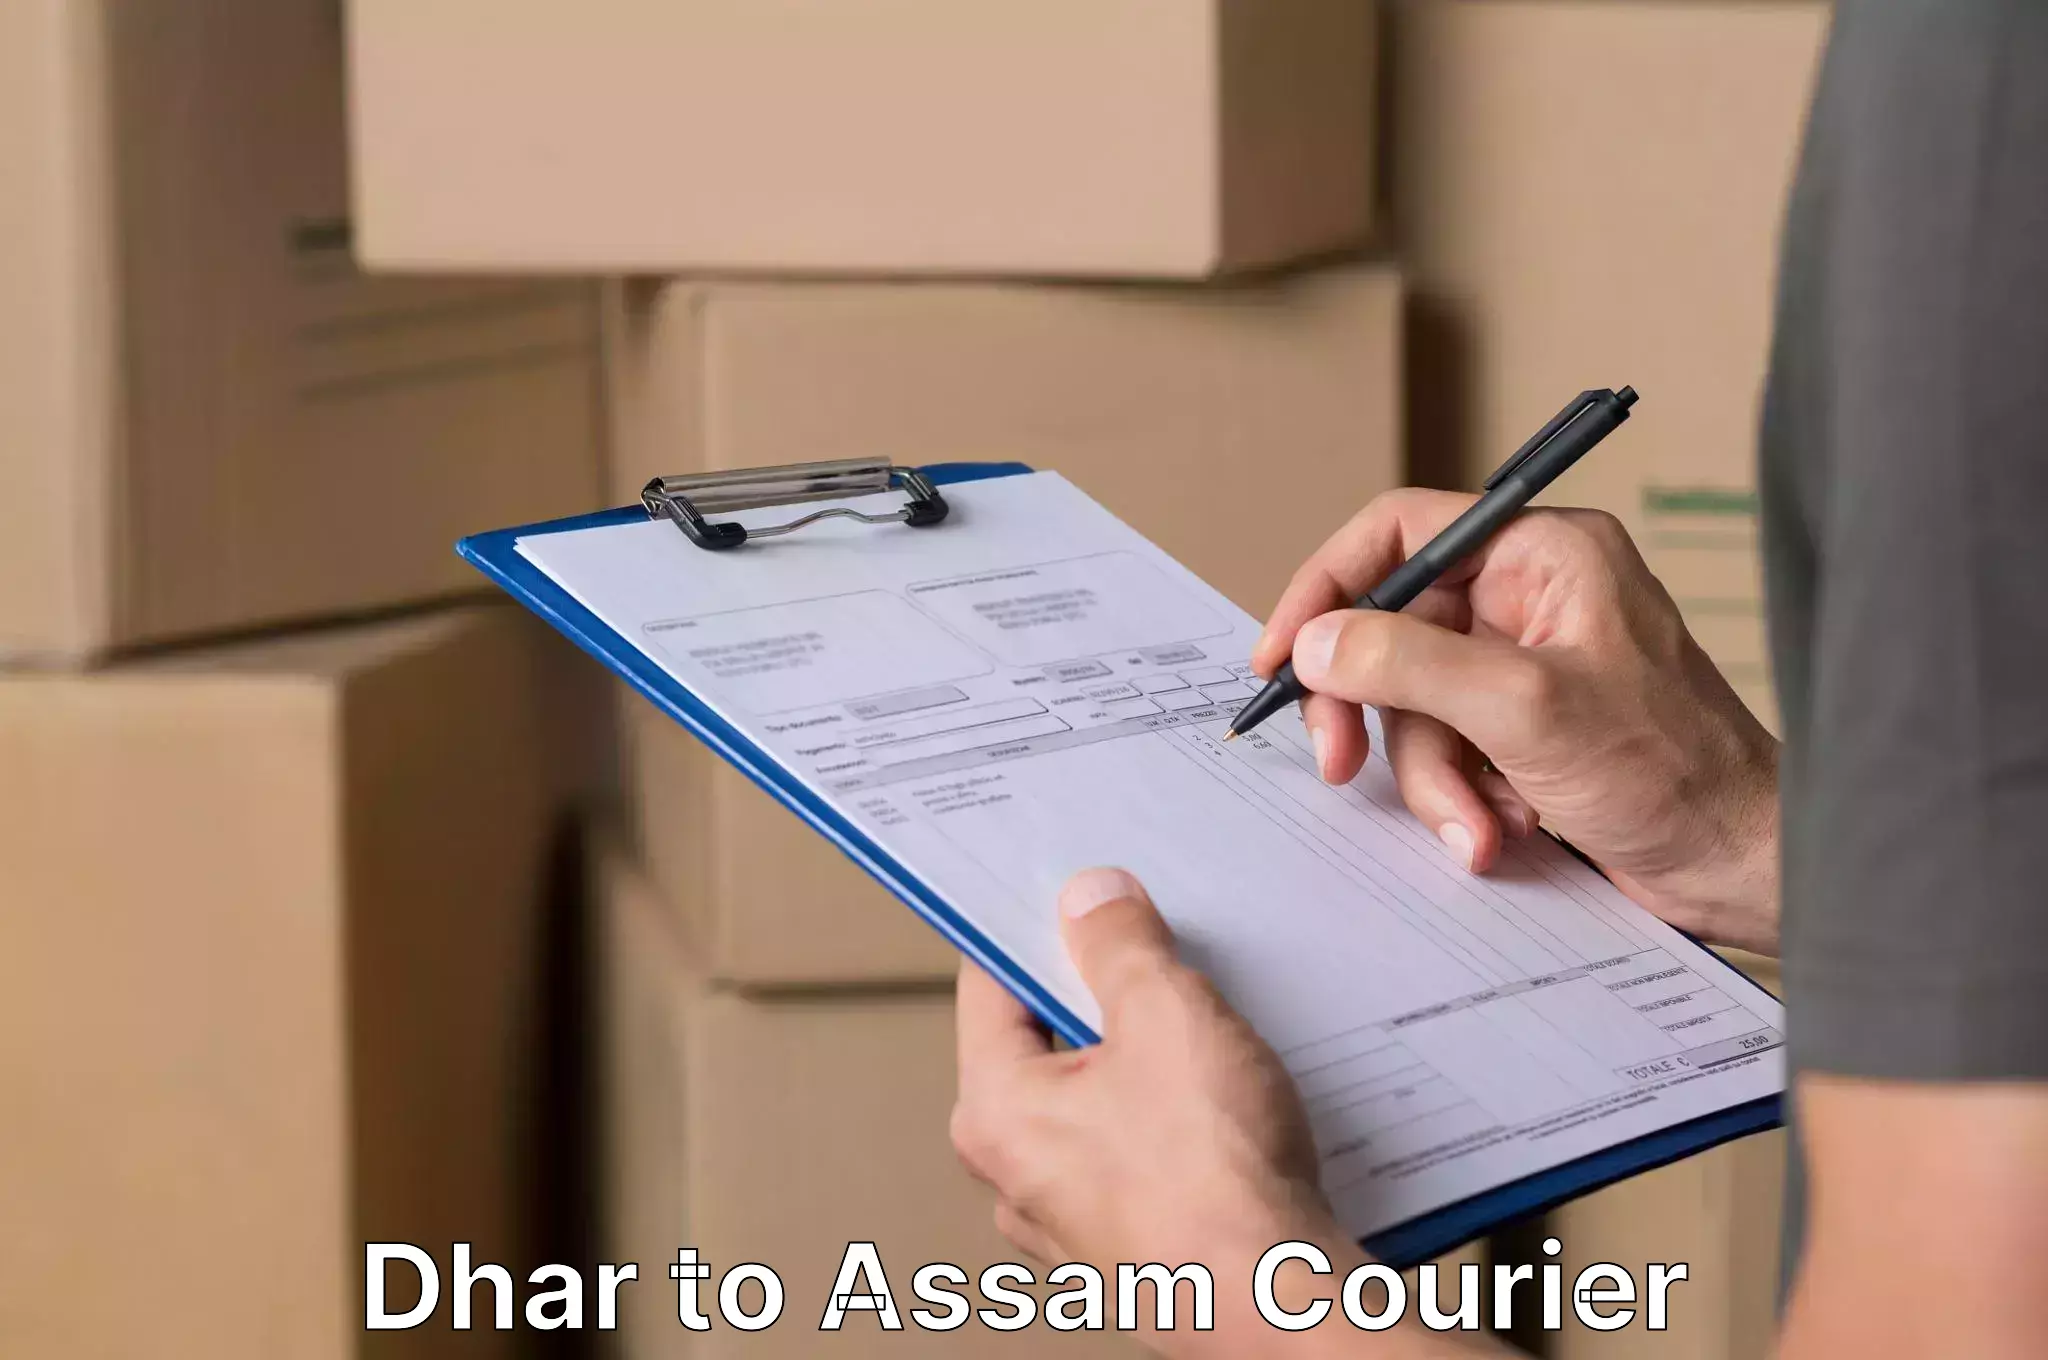 Furniture relocation experts Dhar to Lala Assam